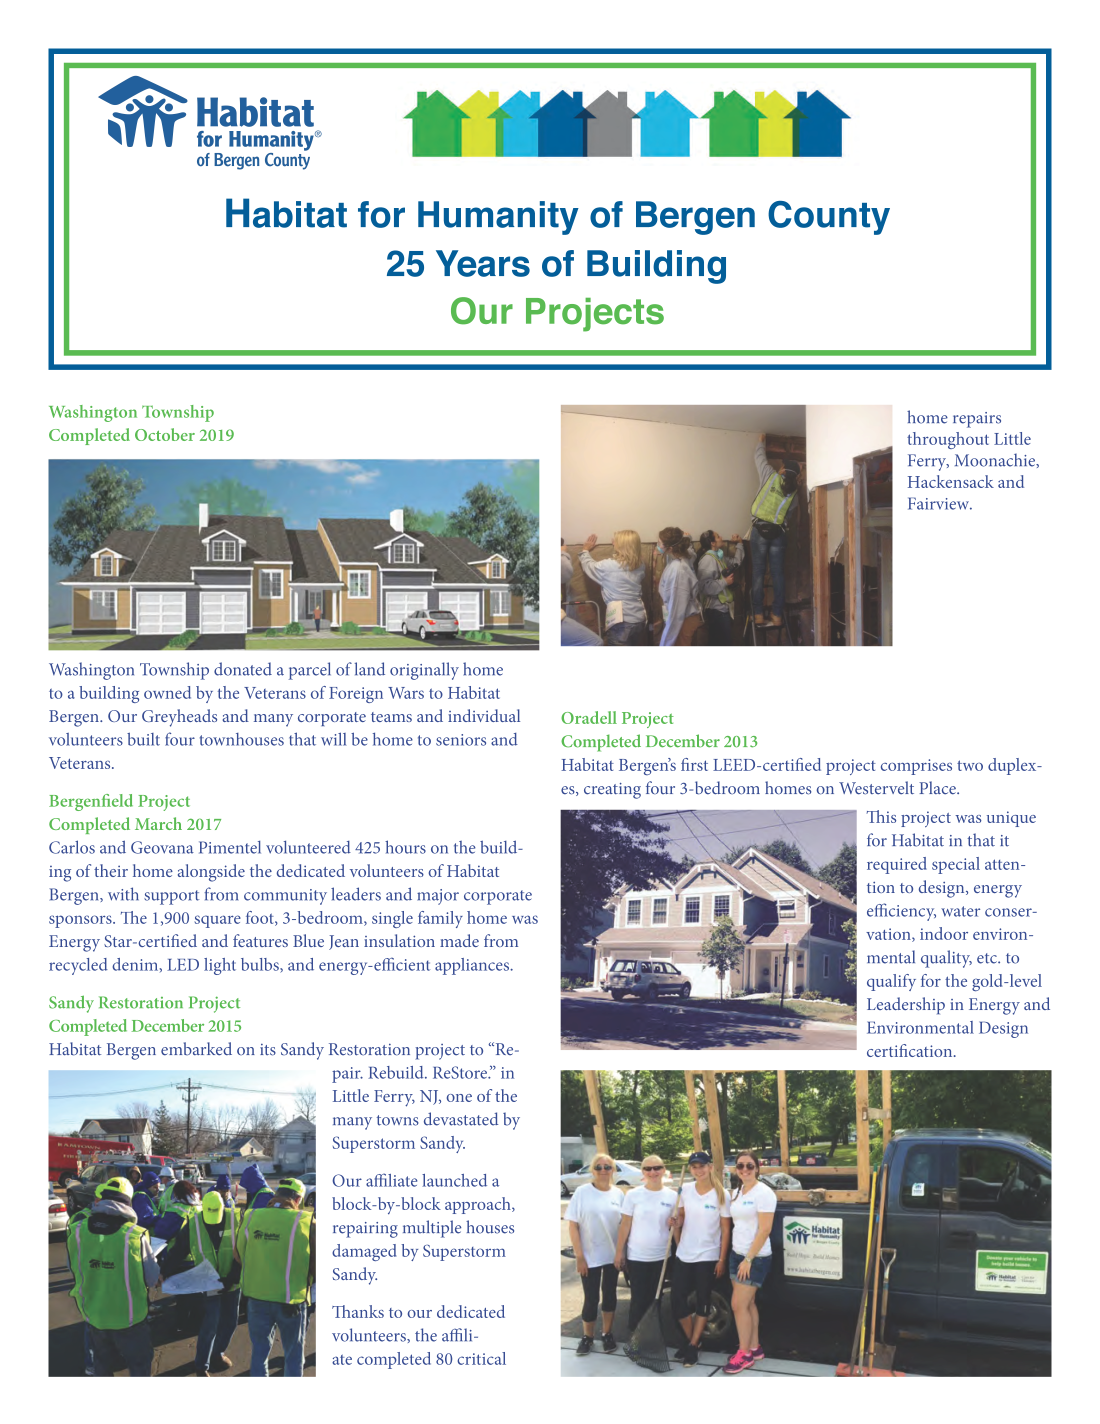 habitat_bergen_history_of_projects_handout_png_page_1_resized.png